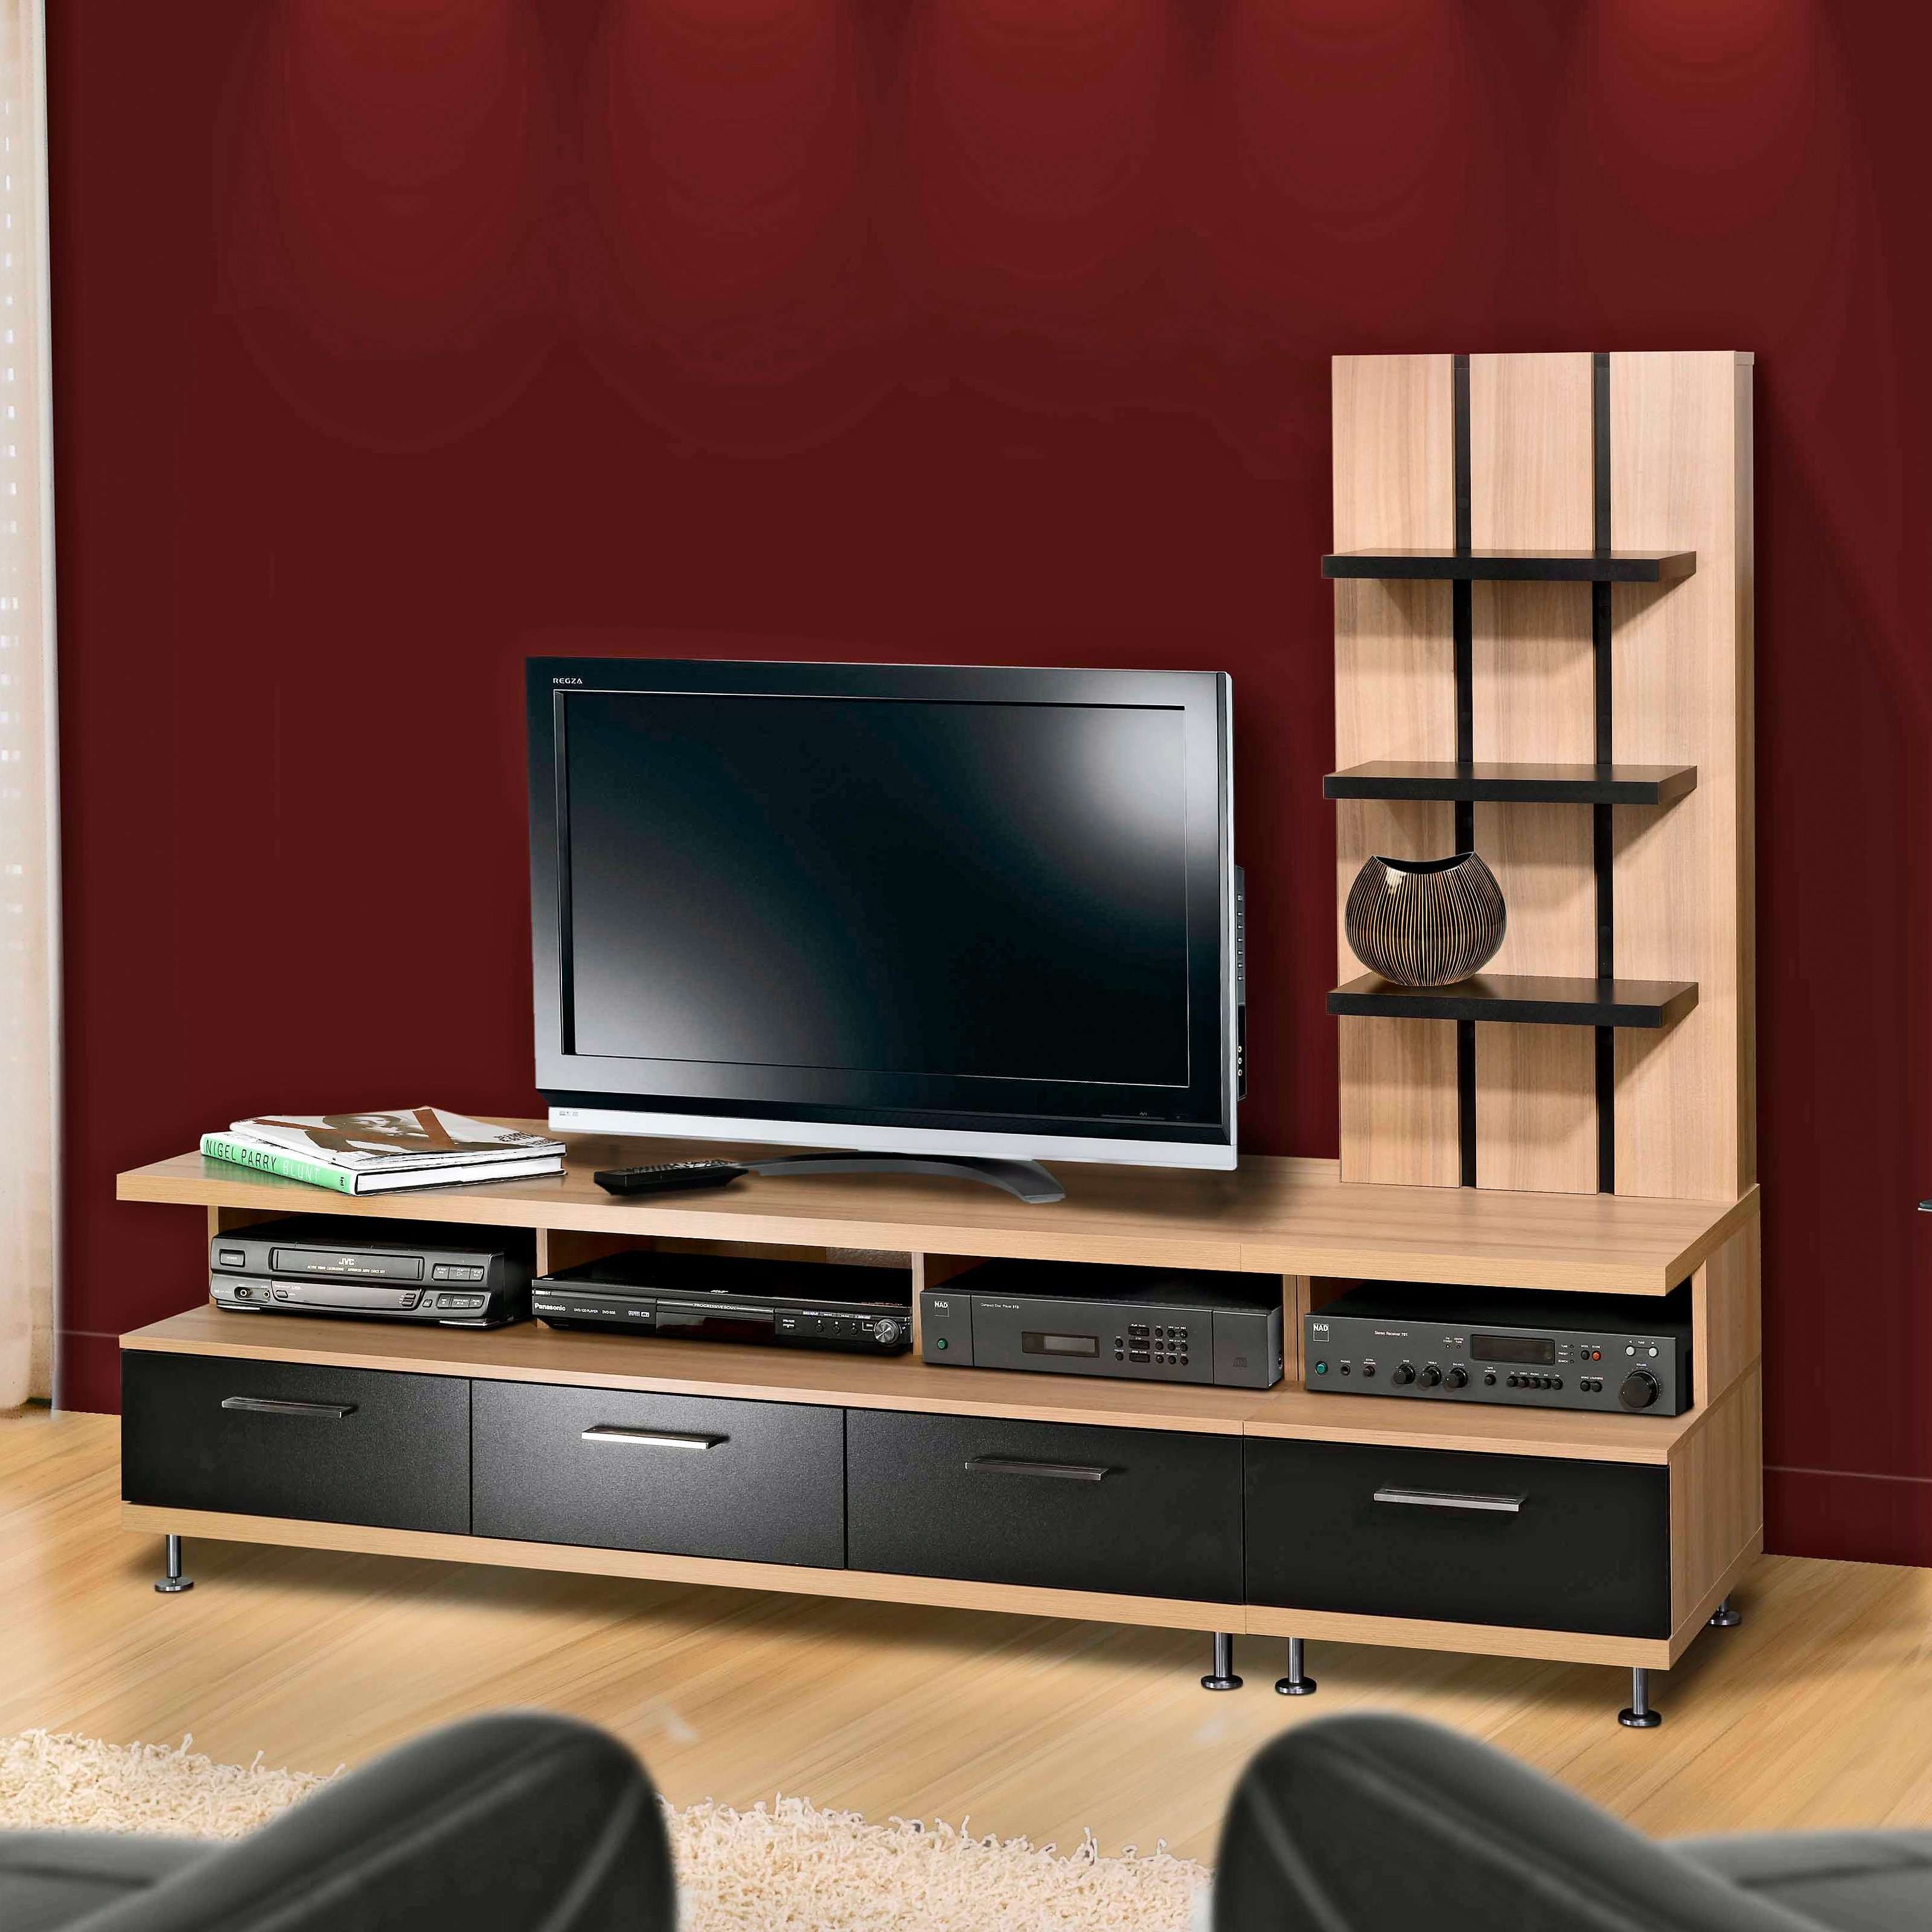 Contemporary Tv Consoles For 60 Inch Tv : Best Contemporary Tv Regarding Contemporary Tv Cabinets For Flat Screens (Gallery 1 of 20)